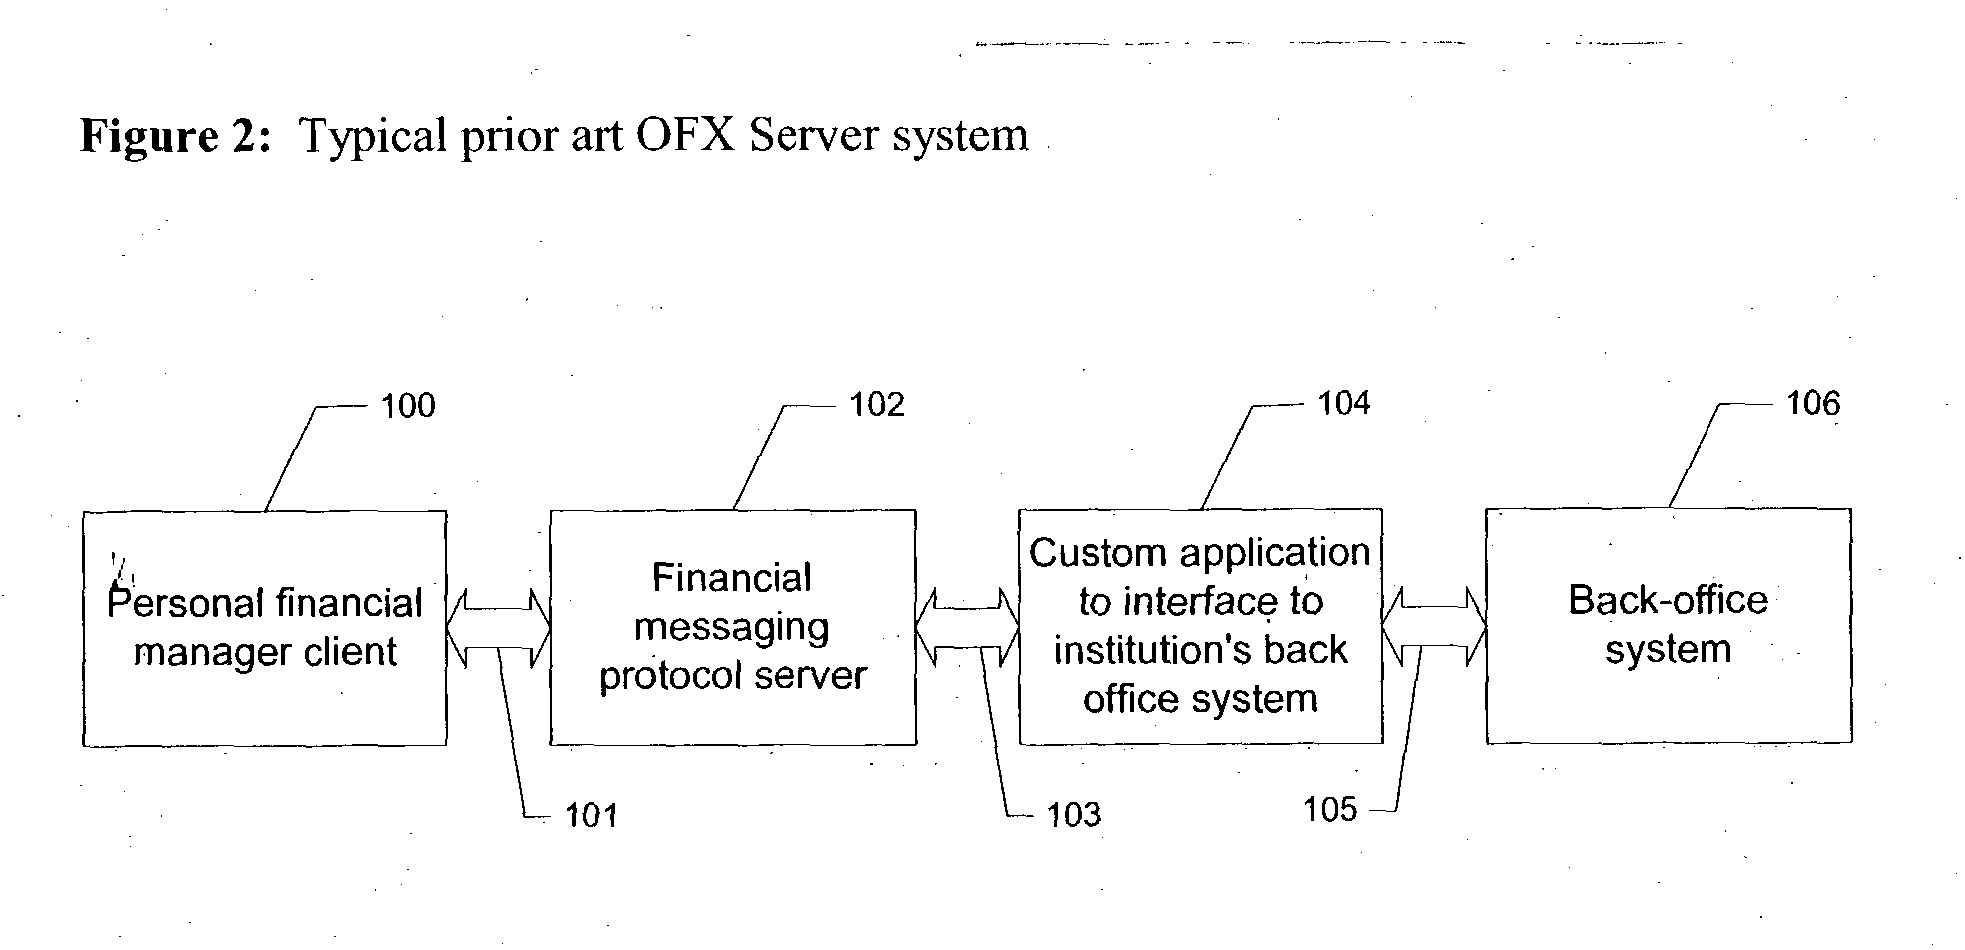 Data collection and transaction initiation using a financial messaging protocol